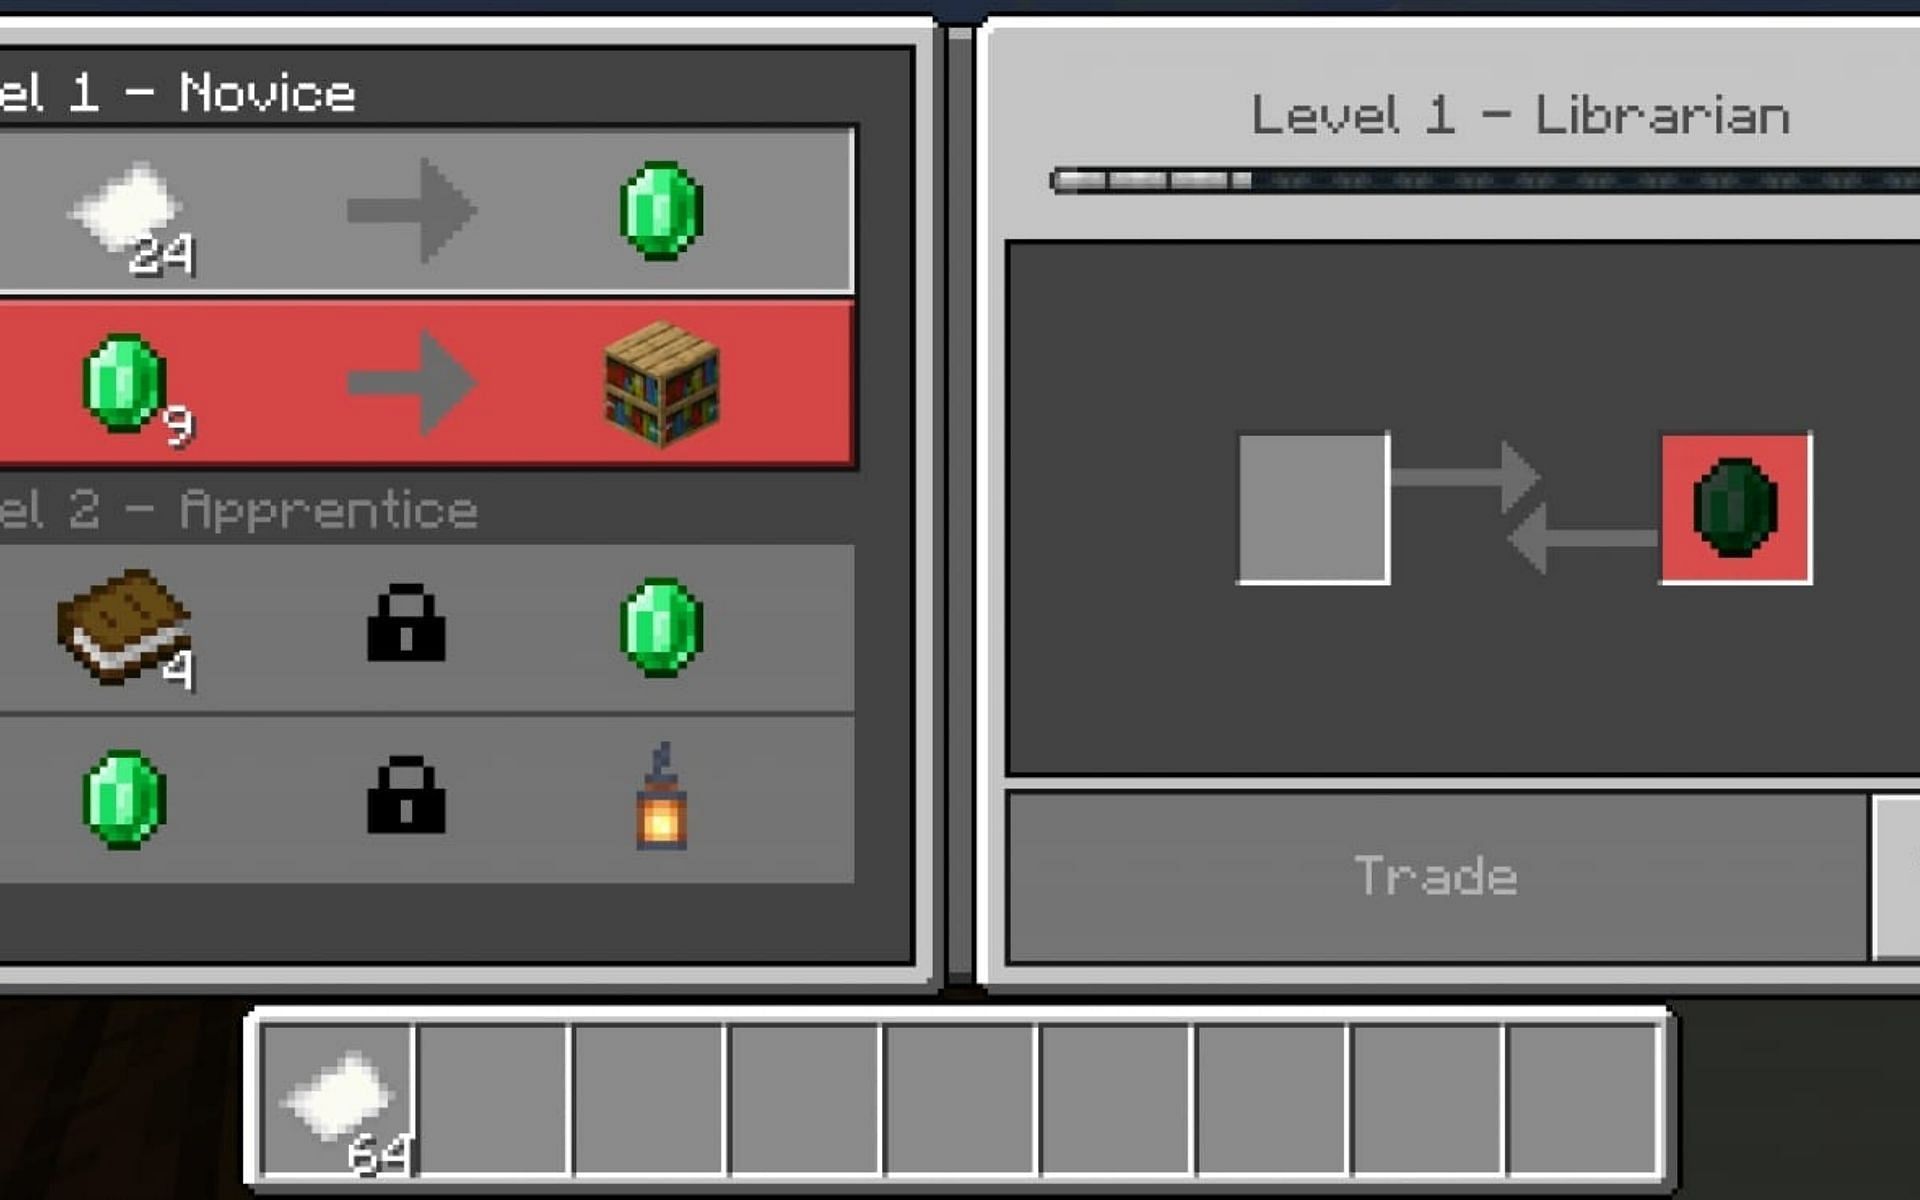 Trade offered by Librarian (Image via Minecraft)